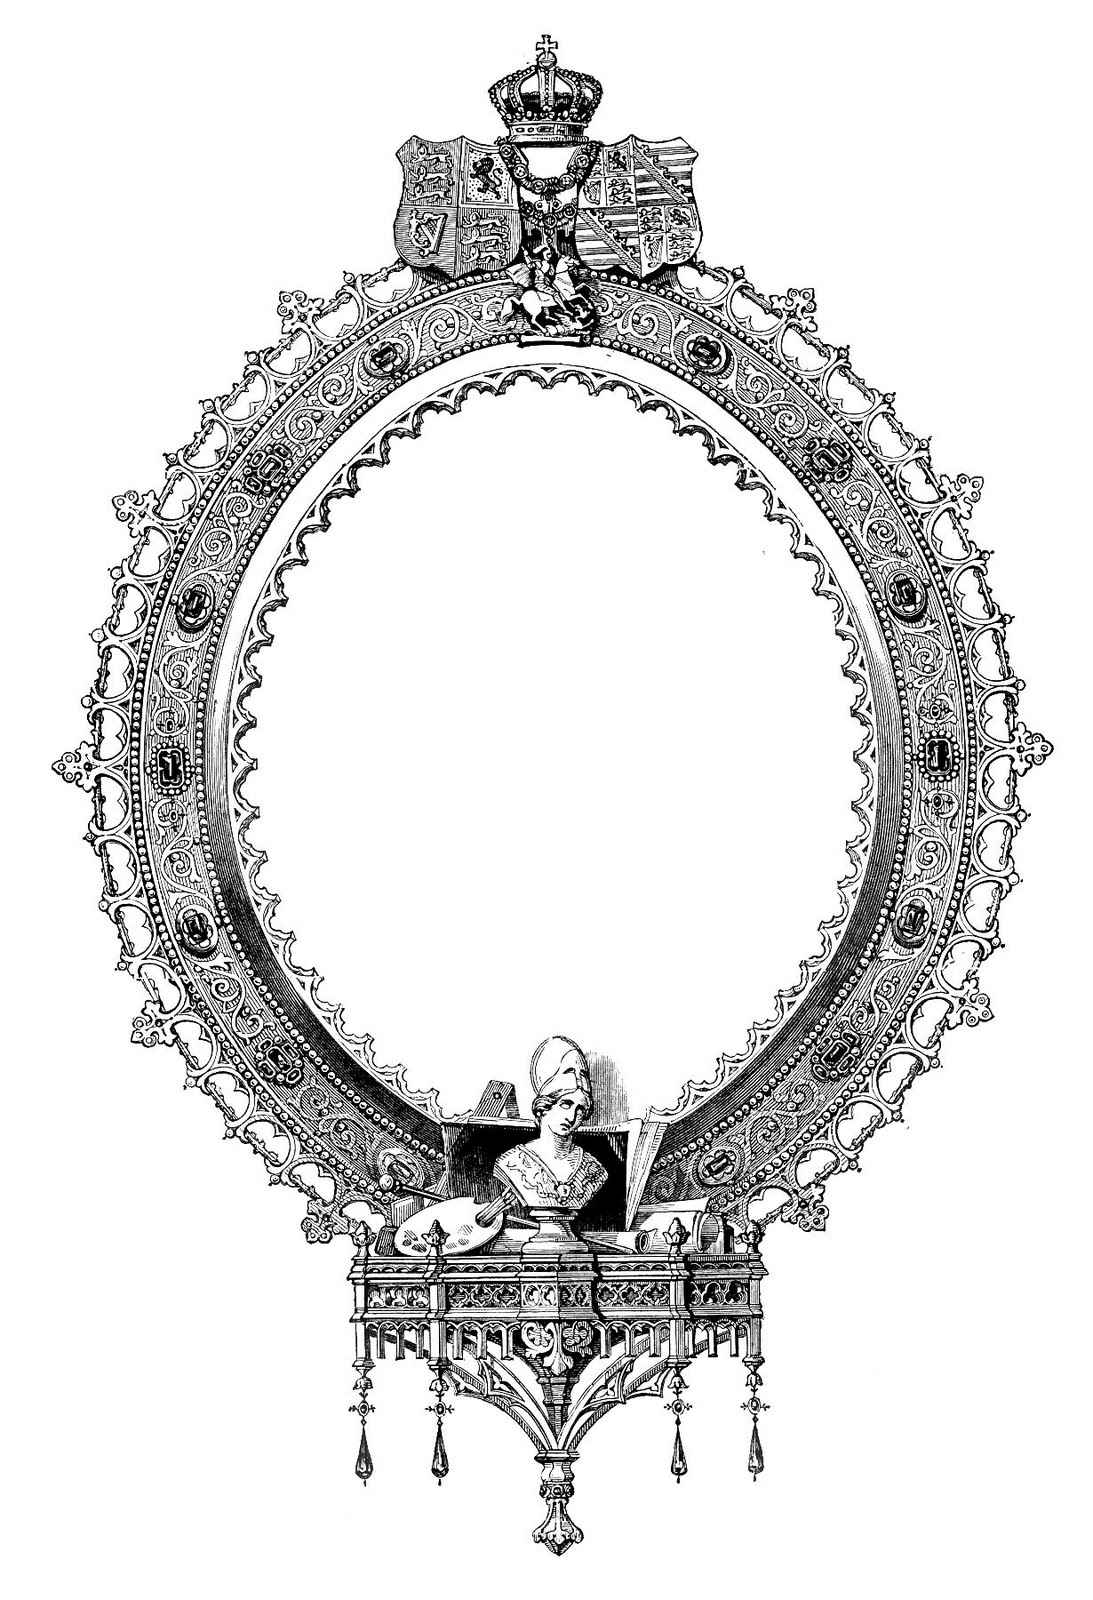 Antique Clip Art   Ornate Engraved Frame   The Graphics Fairy